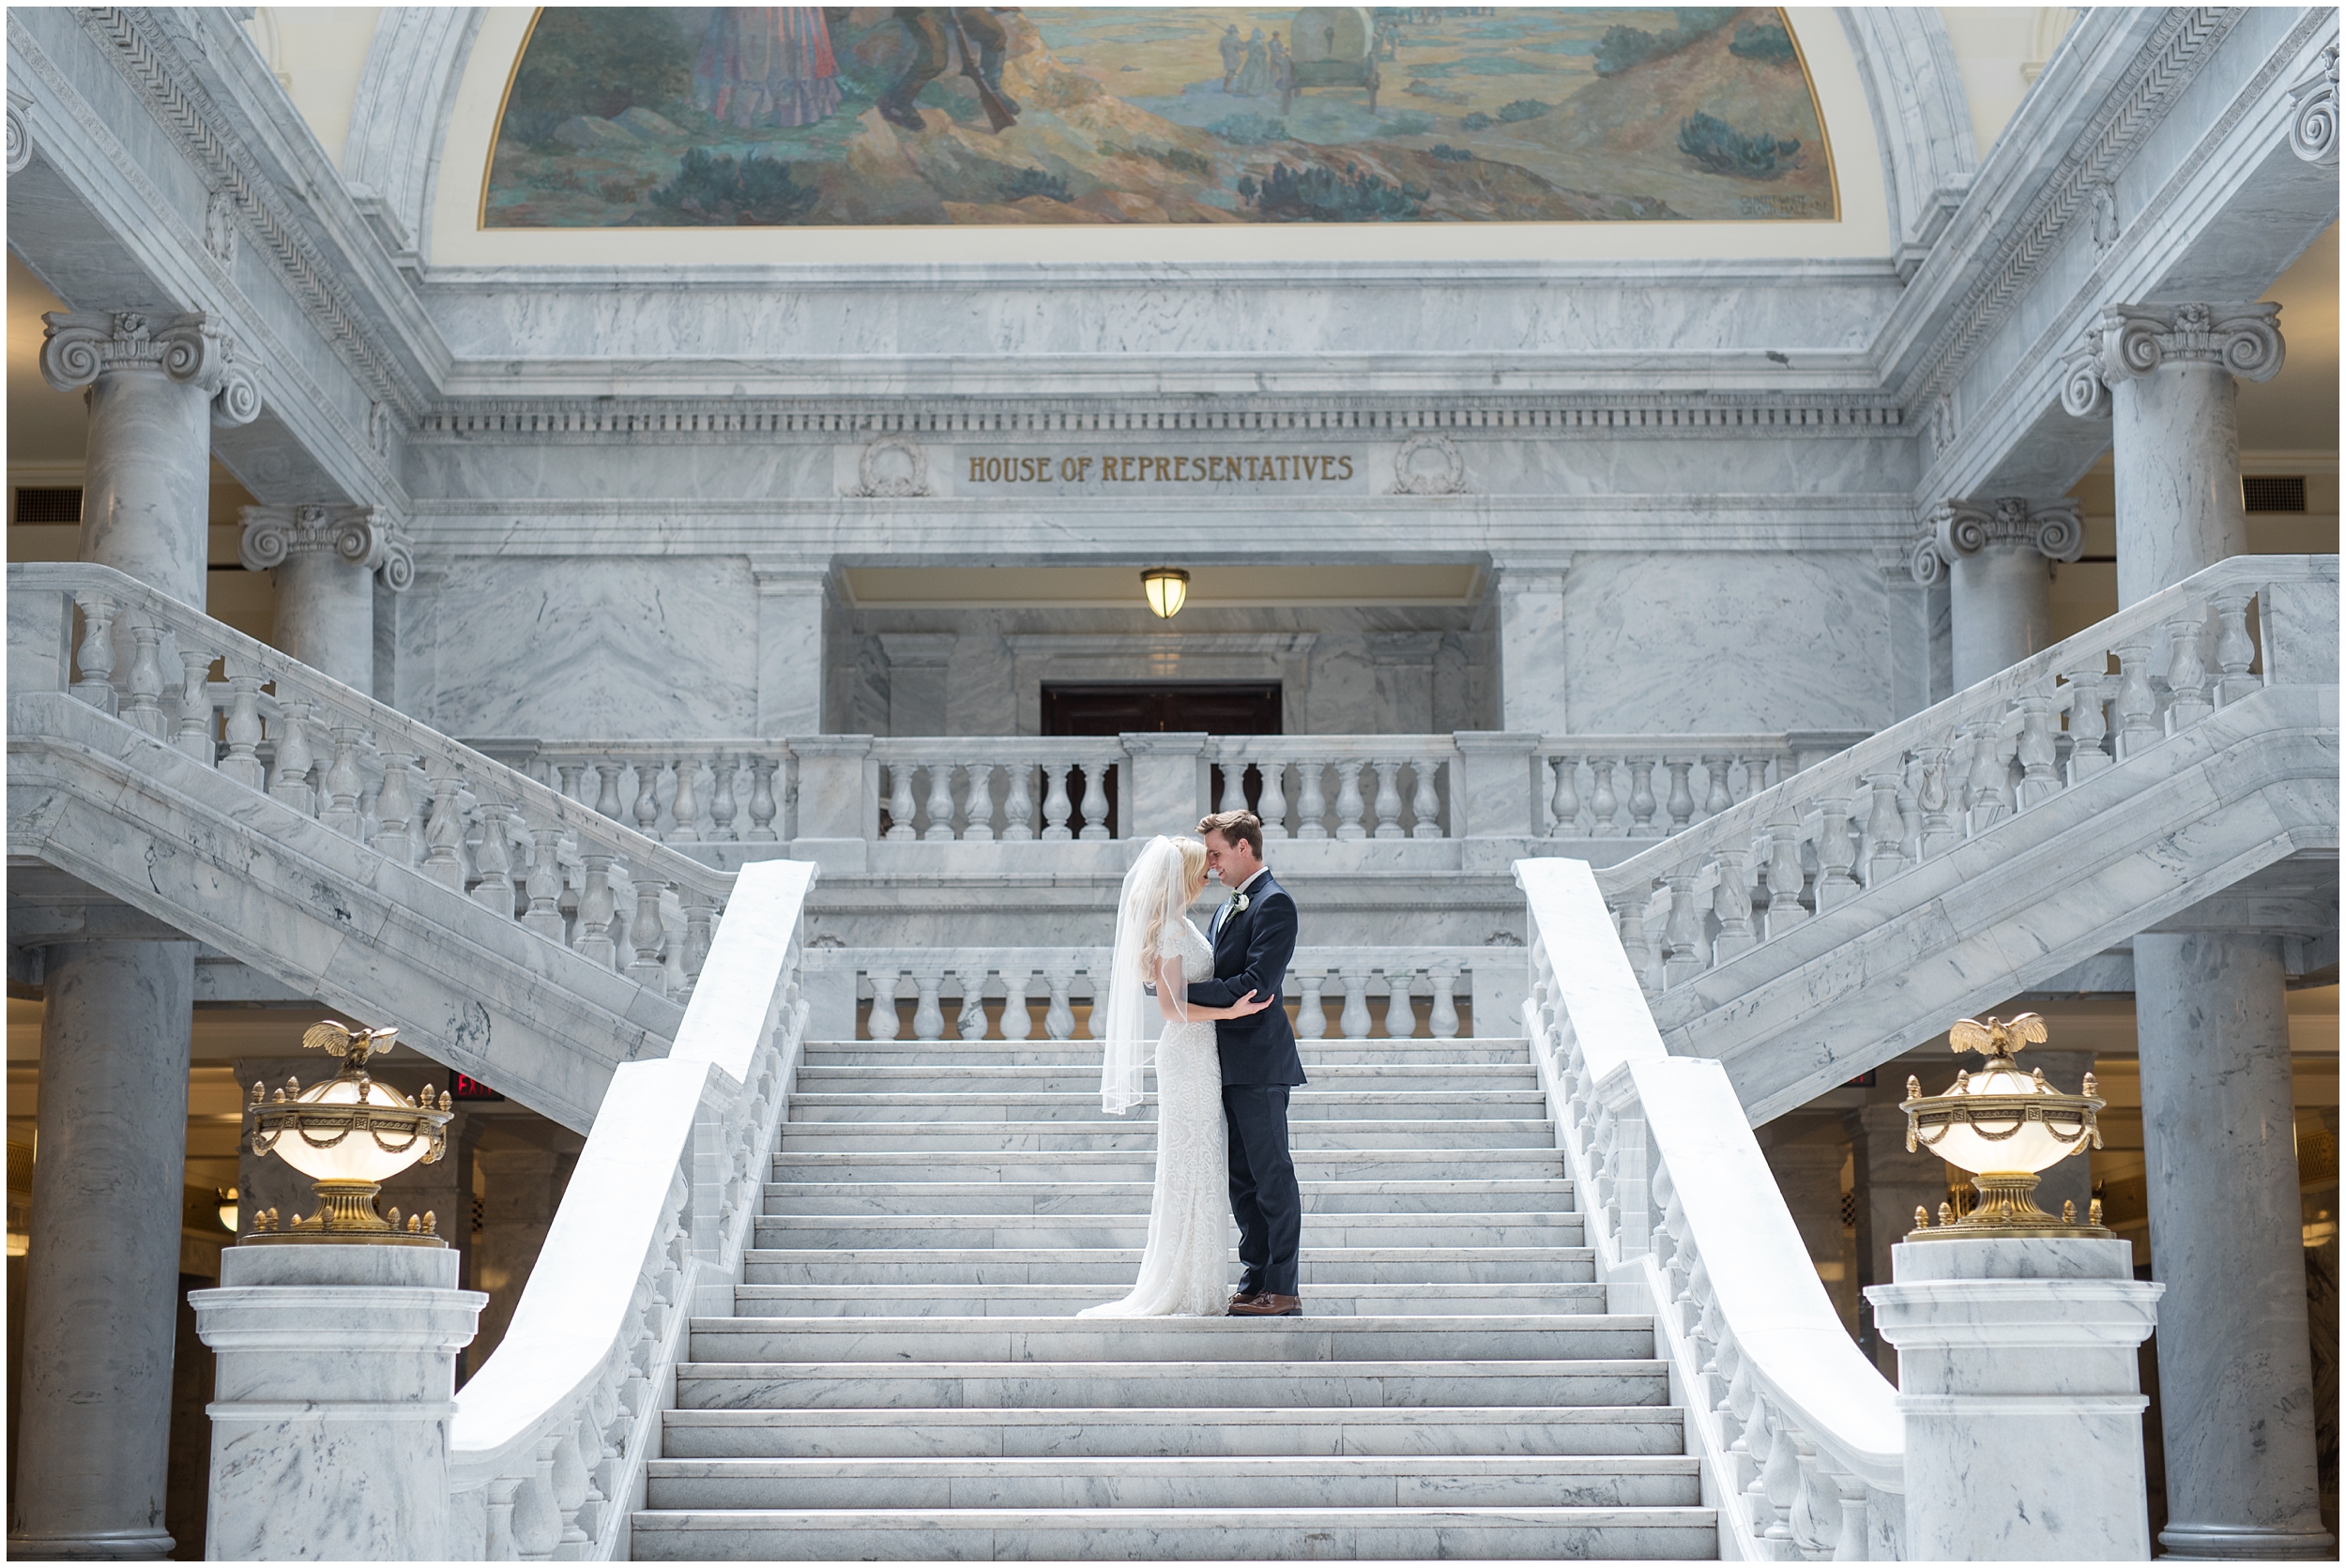 Utah state capital, navy suit, grand staircase, Utah wedding photographers, Utah wedding photographer, Utah wedding photography, Utah county wedding photography, Utah county wedding photographer, salt lake city photographers, salt lake city wedding photography, salt lake photographers, salt lake city photographers, photographers in Utah, Utah photography, photography Utah, photographer Utah, Kristina Curtis photography, Kristina Curtis Photographer, www.kristinacurtisphotography.com